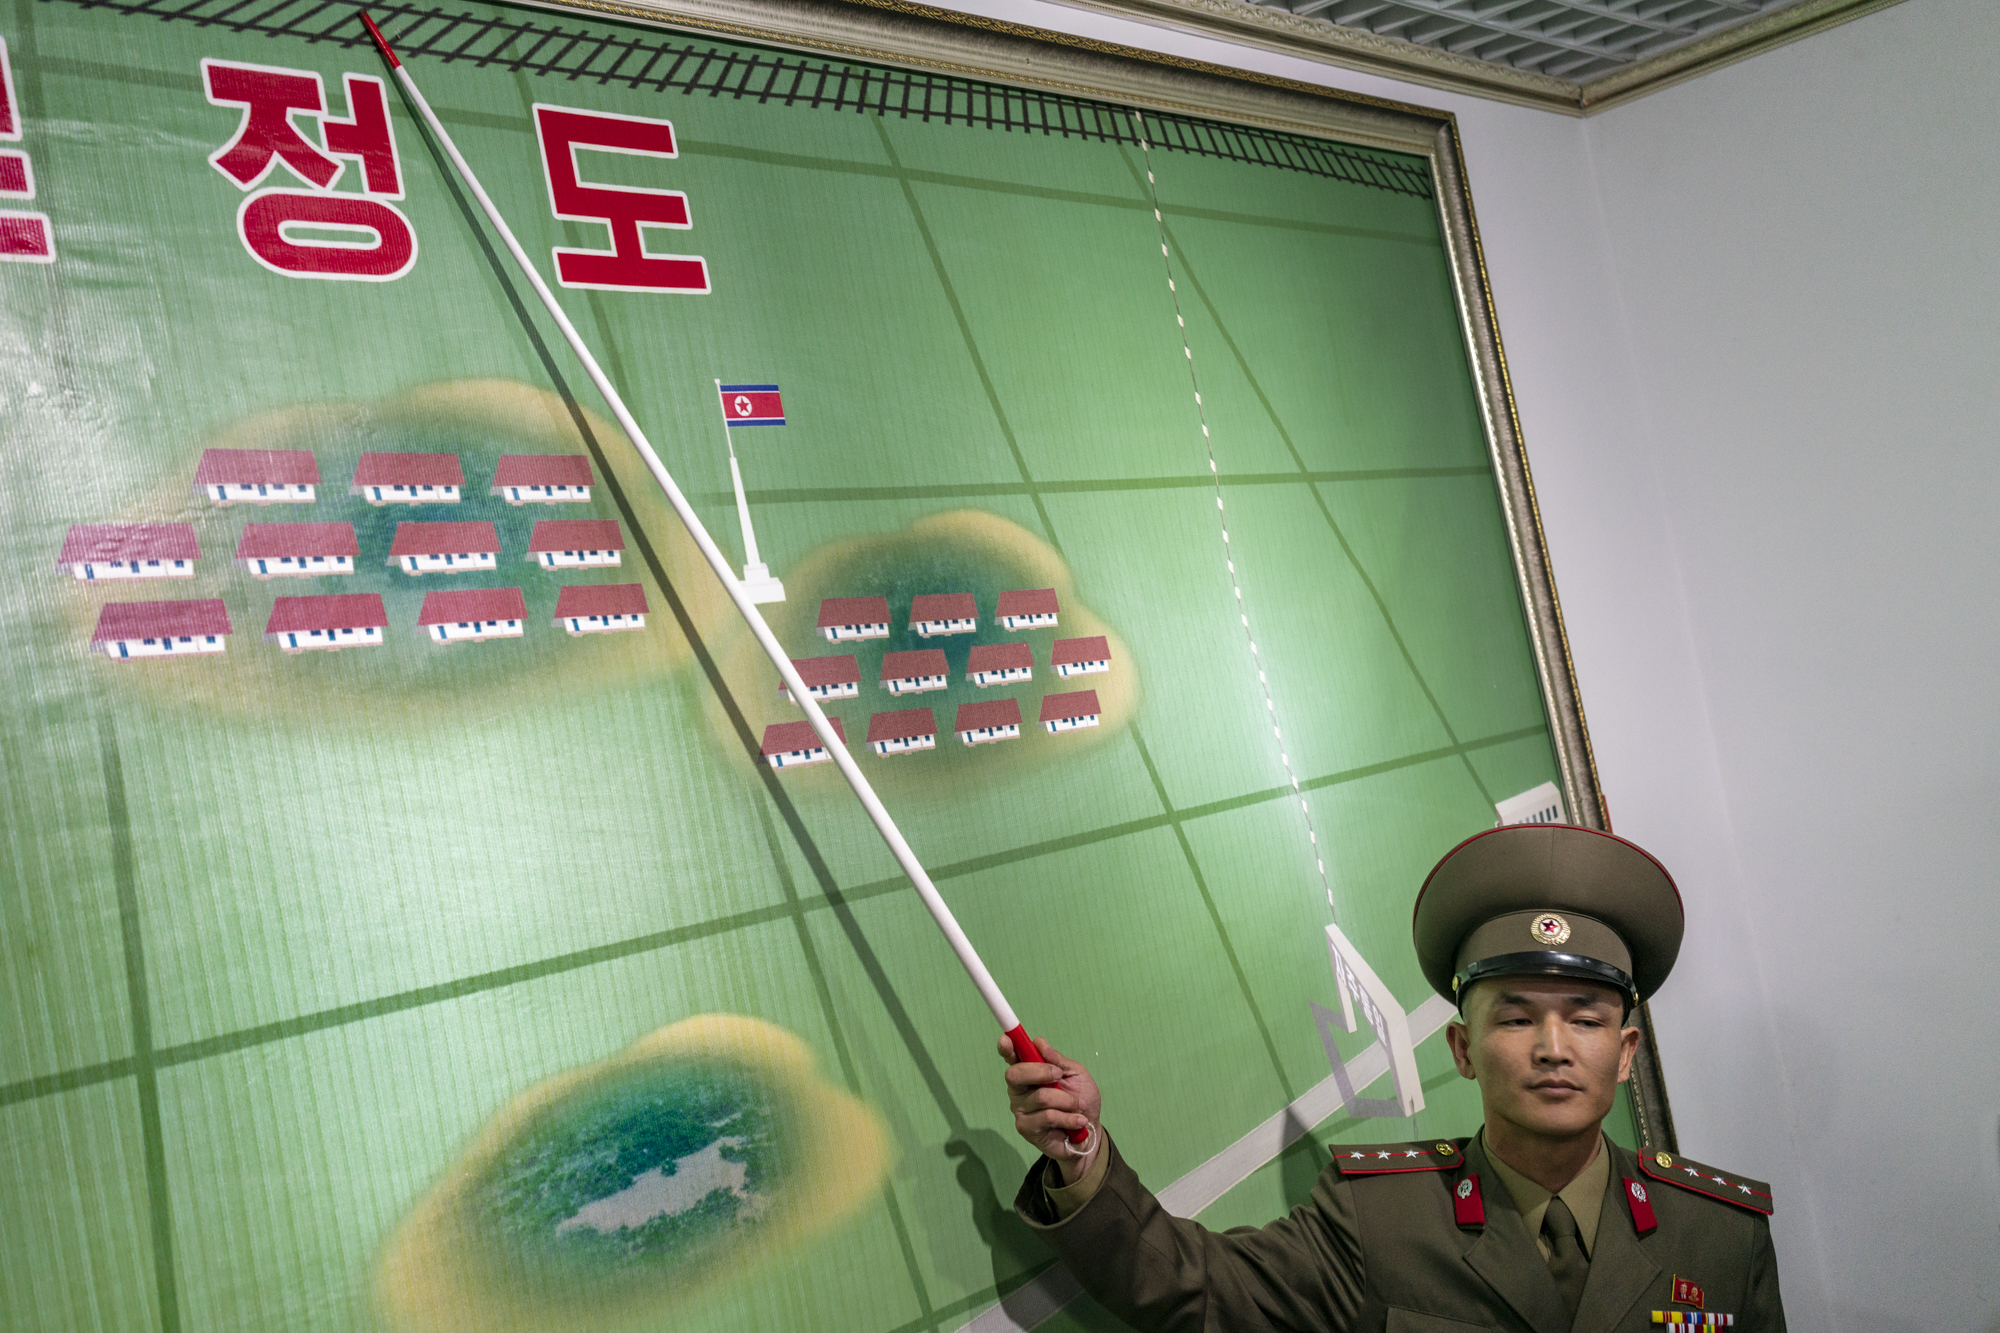  A North Korean soldier points a map of the border between North and South Korea in the DMZ.  